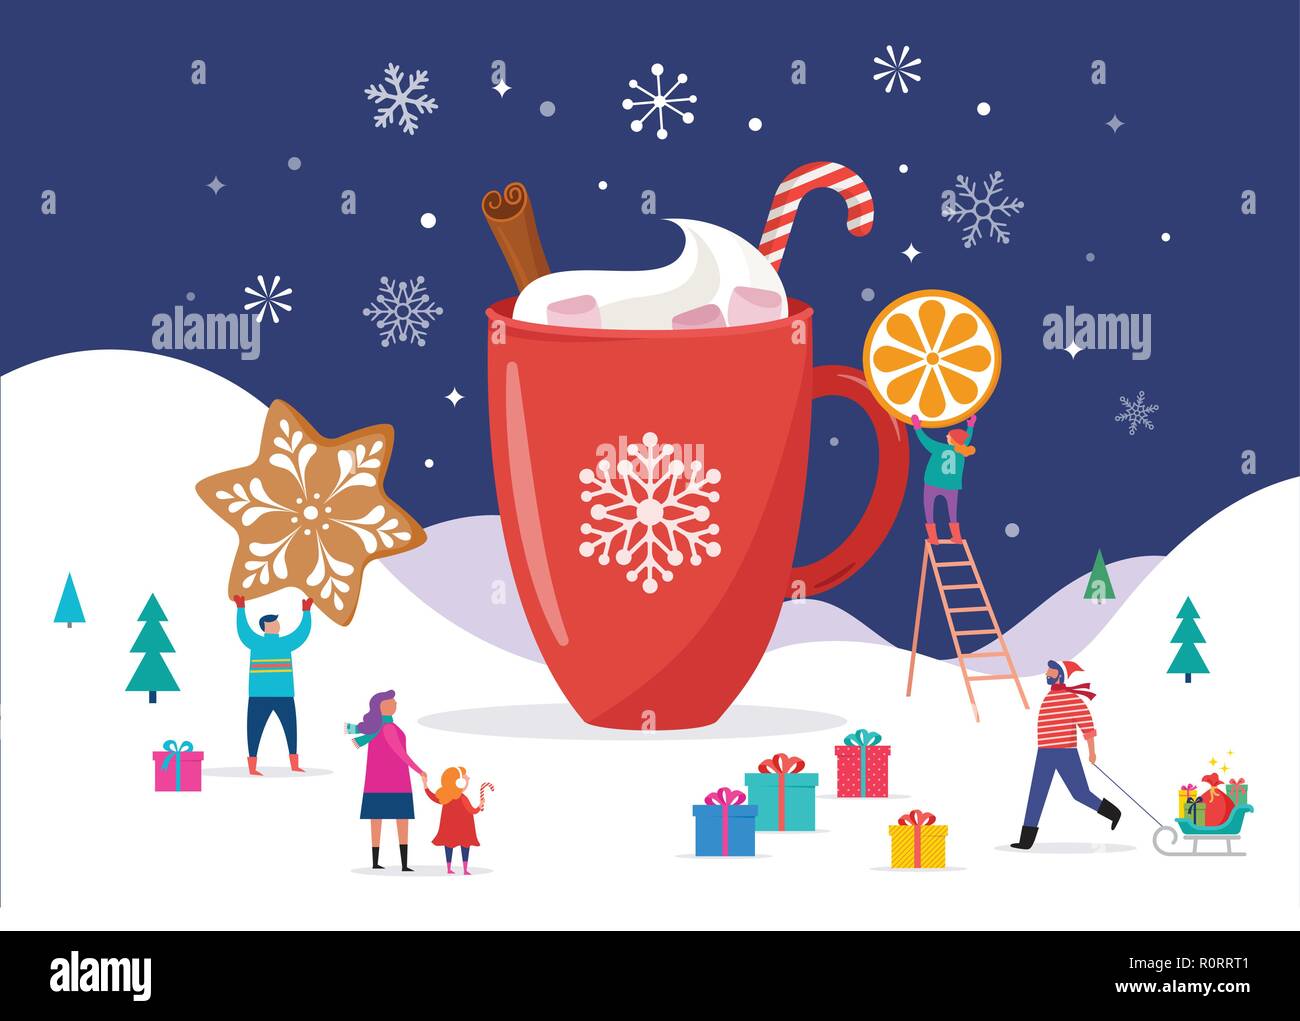 Merry Christmas, winter scene with a big cocoa mug and small people, young men and women, families having fun in snow, skiing, snowboarding, sledding, ice skating Stock Vector